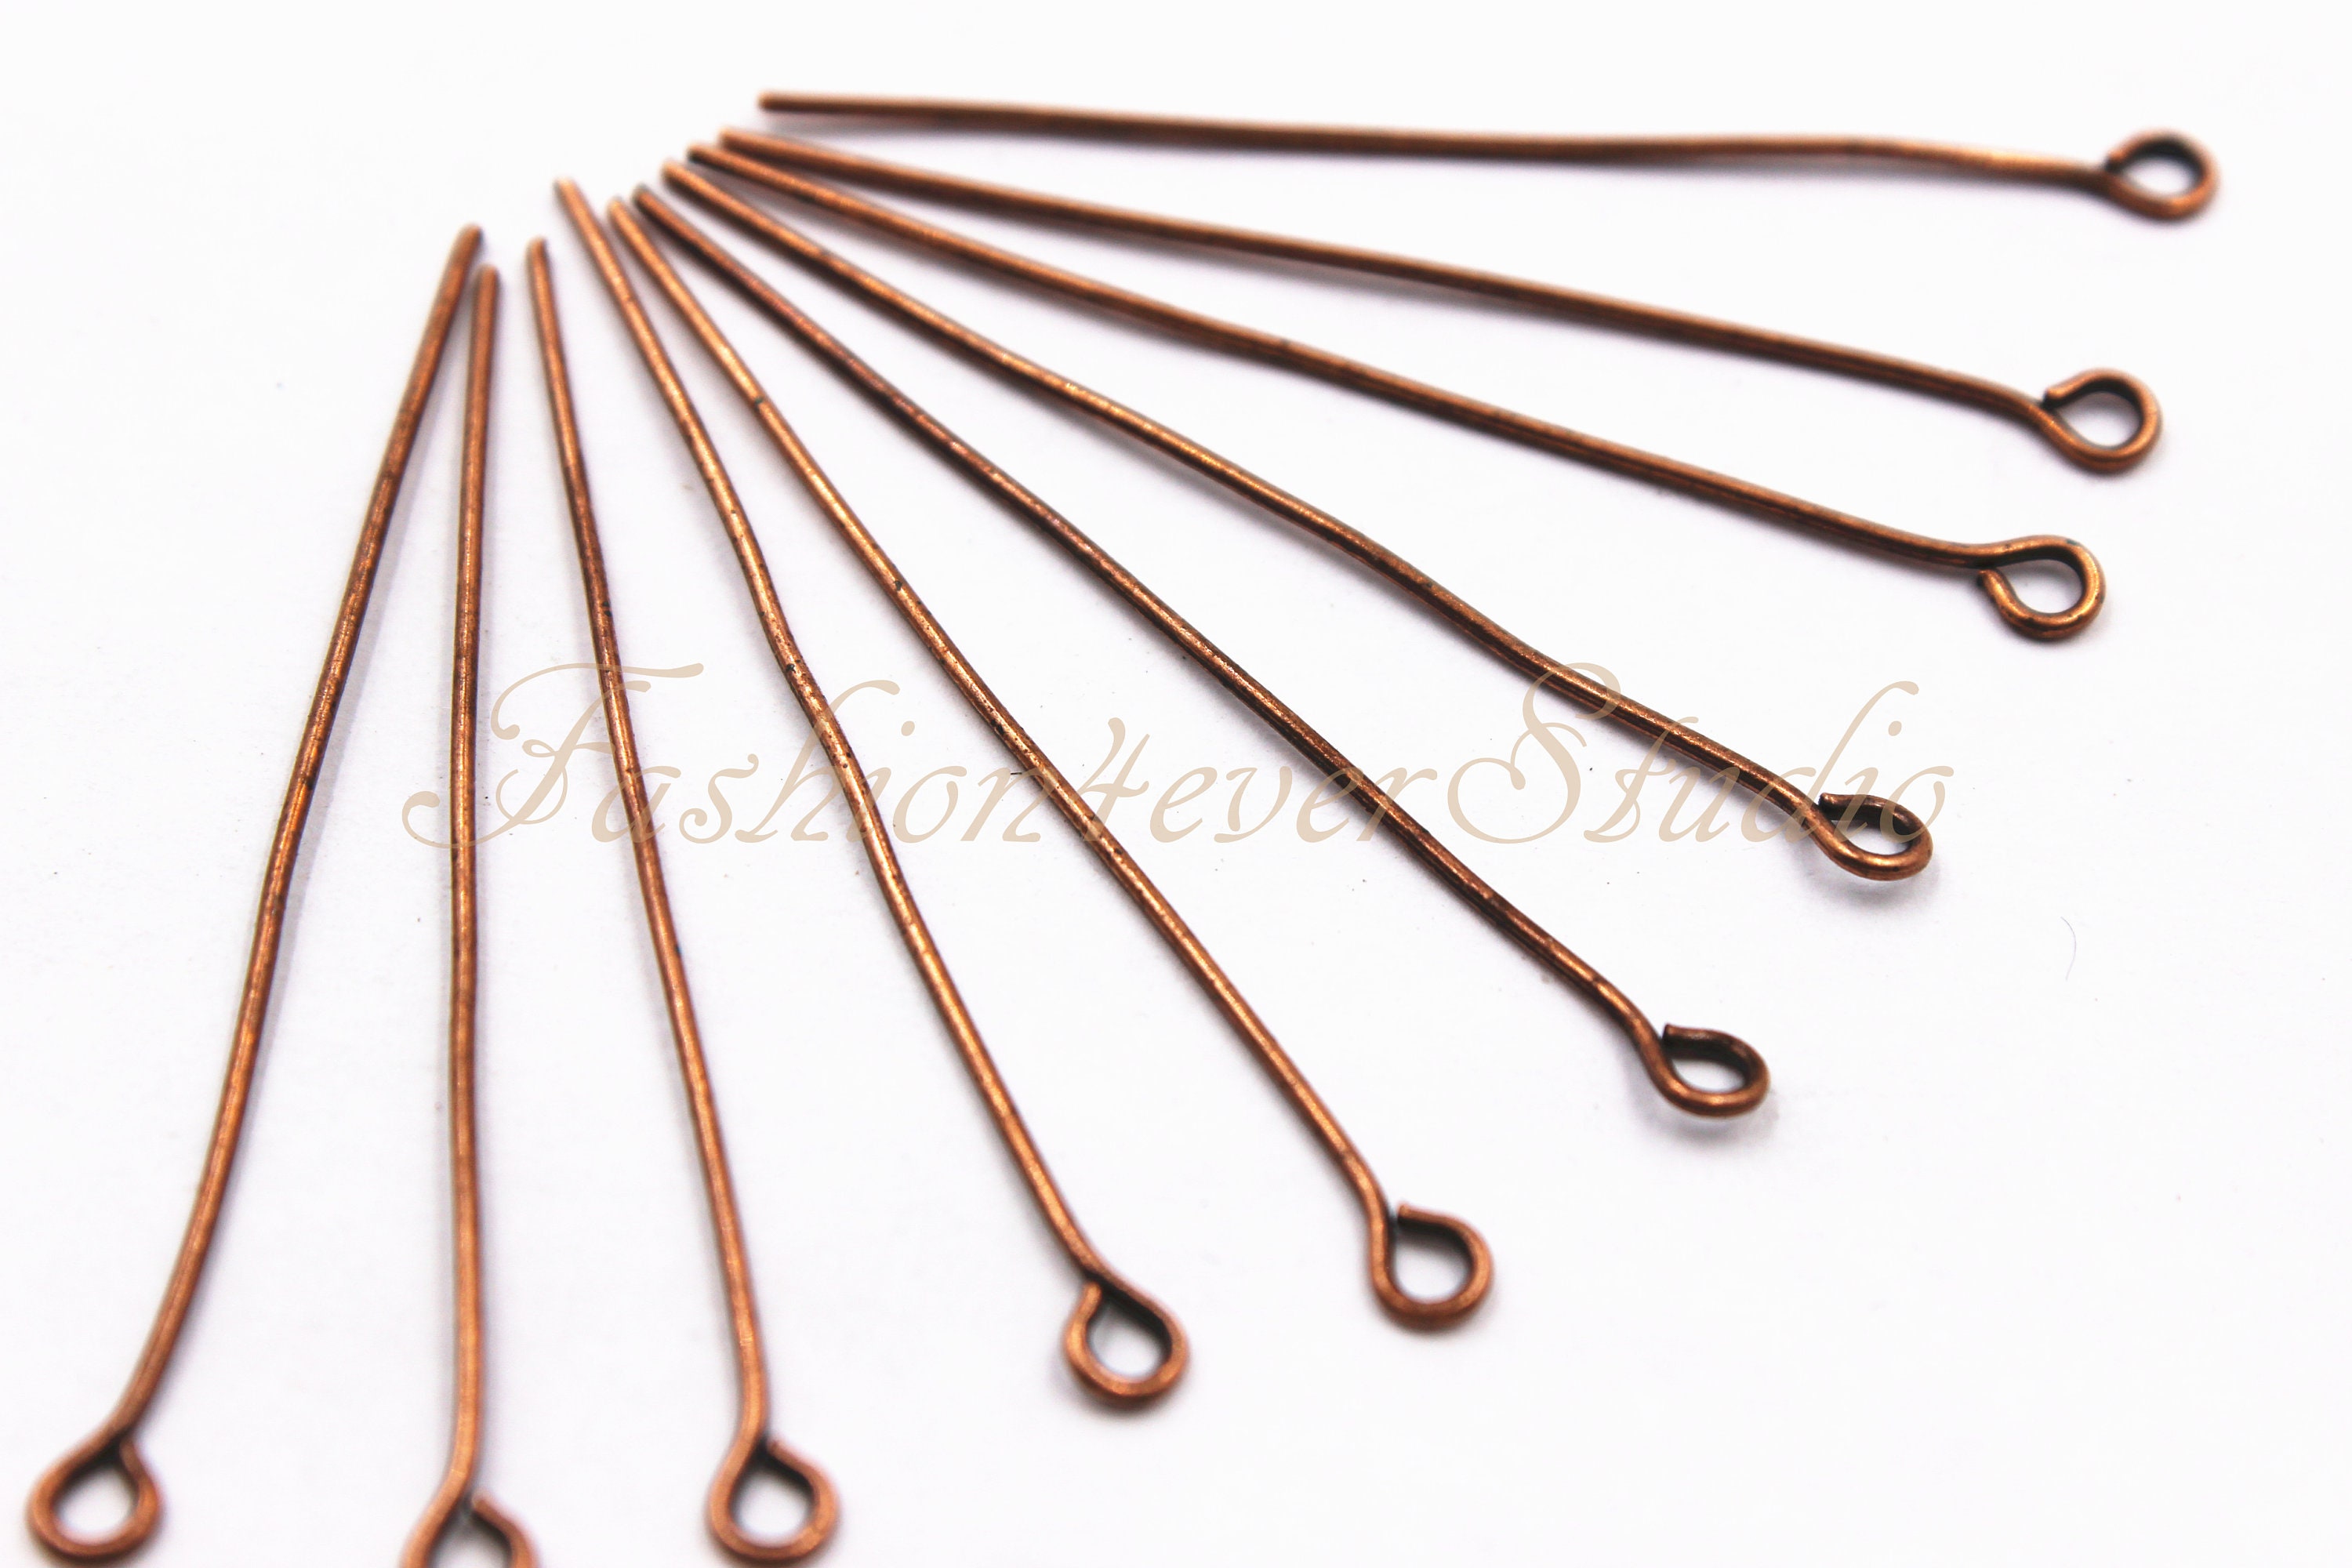 10 Copper Headpins Wire Wrapped Loop End Head Pins Handcrafted Head Pins  Copper Headpins Wrapped Loop Headpins for Jewelry Making Head Pins 